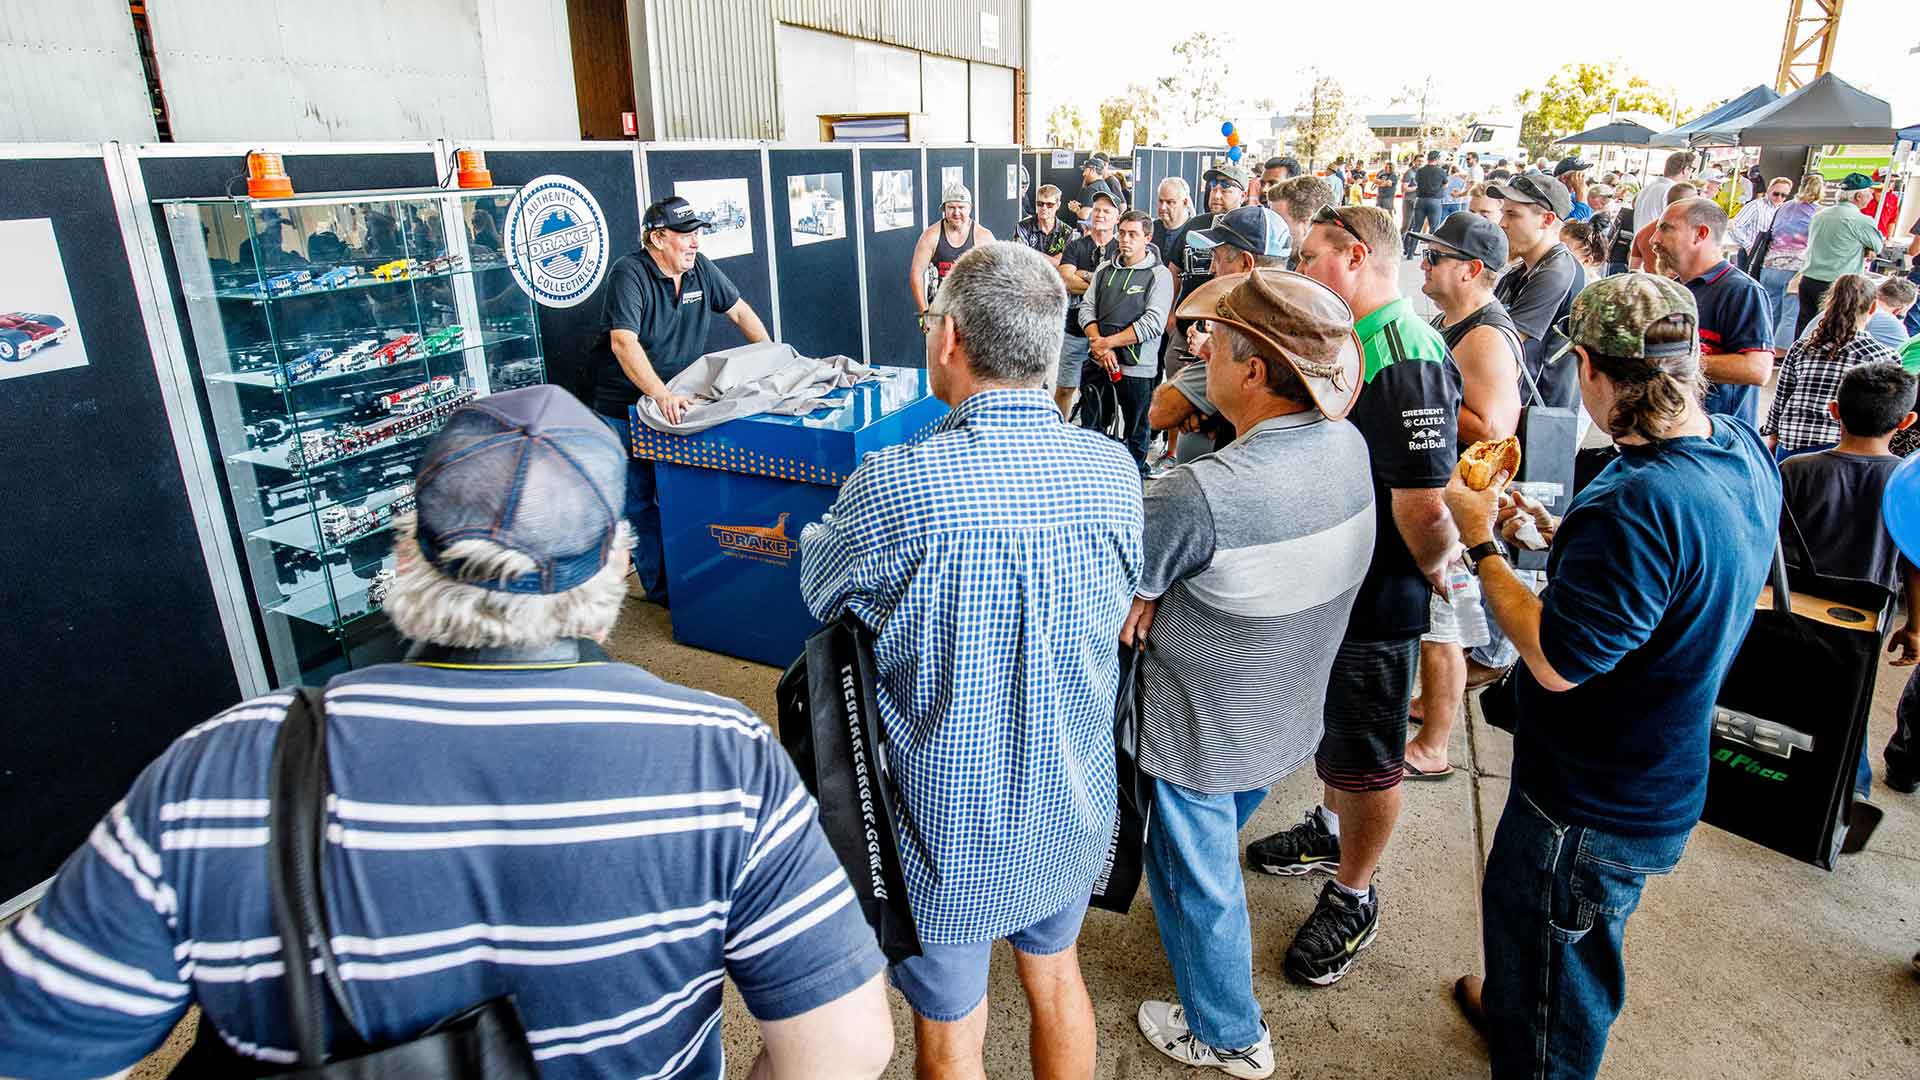 We wrap up the 2018 Drake Group Open Day